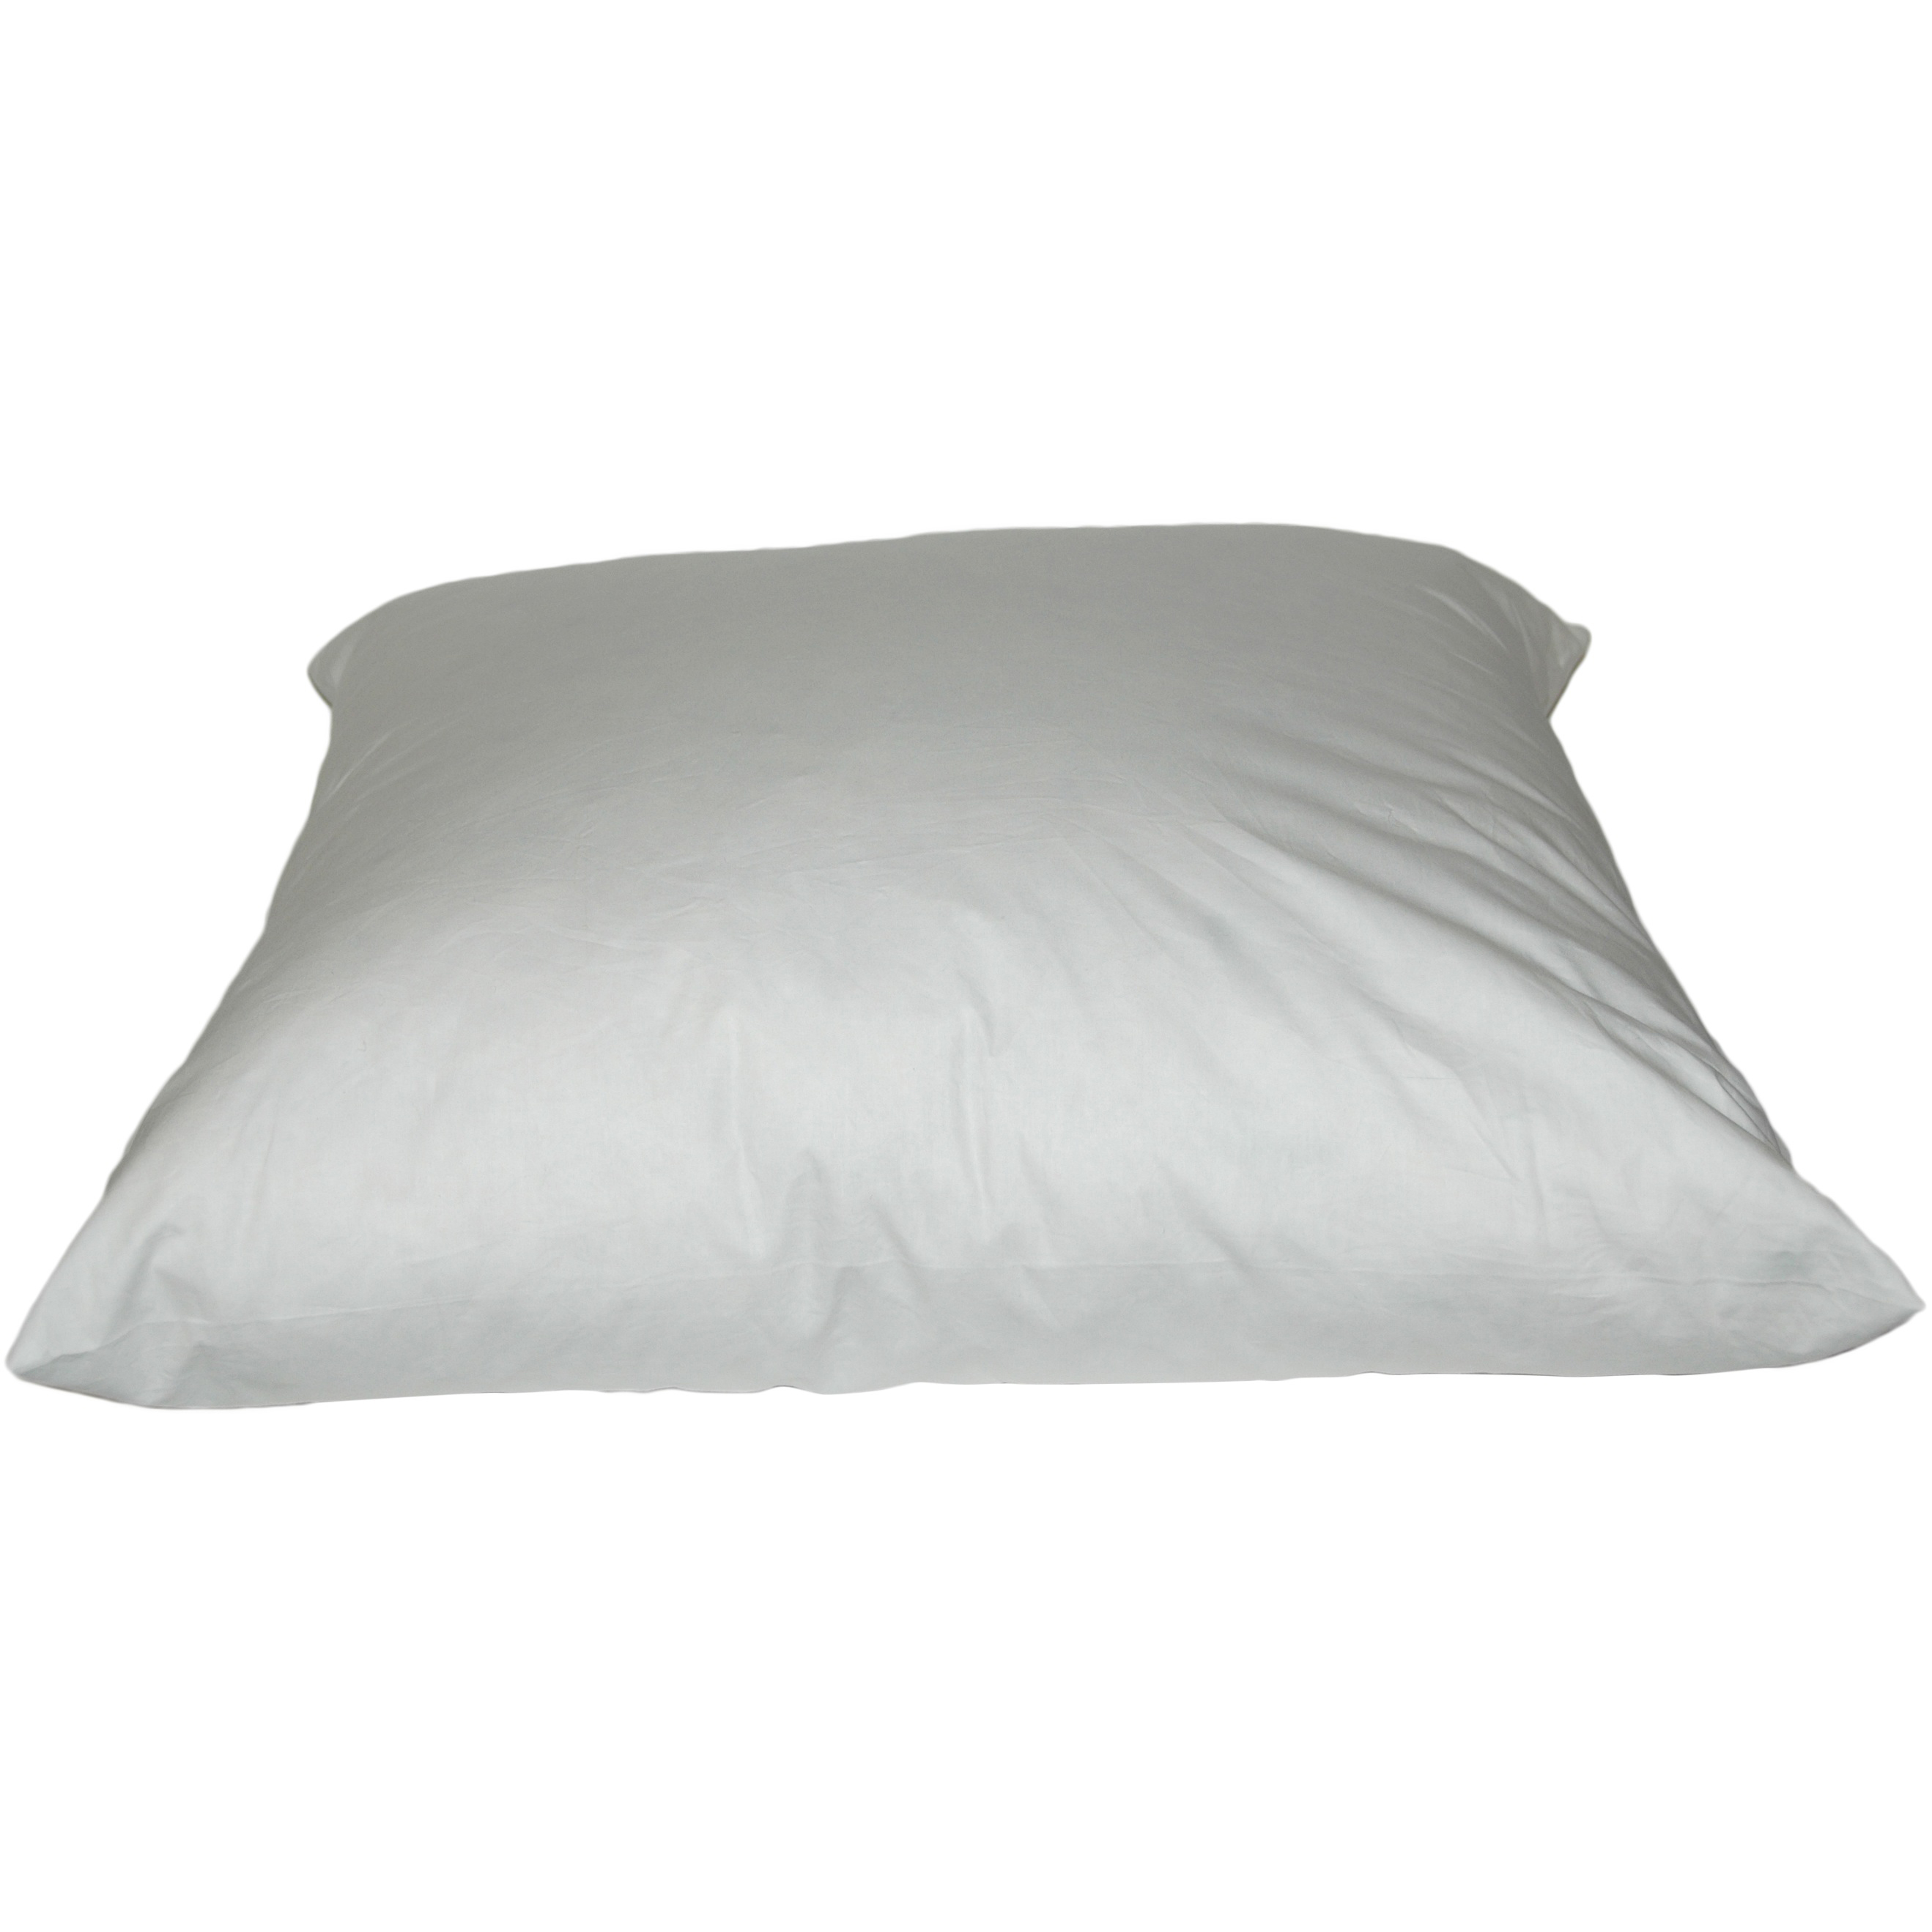 Down & Feather Pillows 50/50 Blend 20 inch